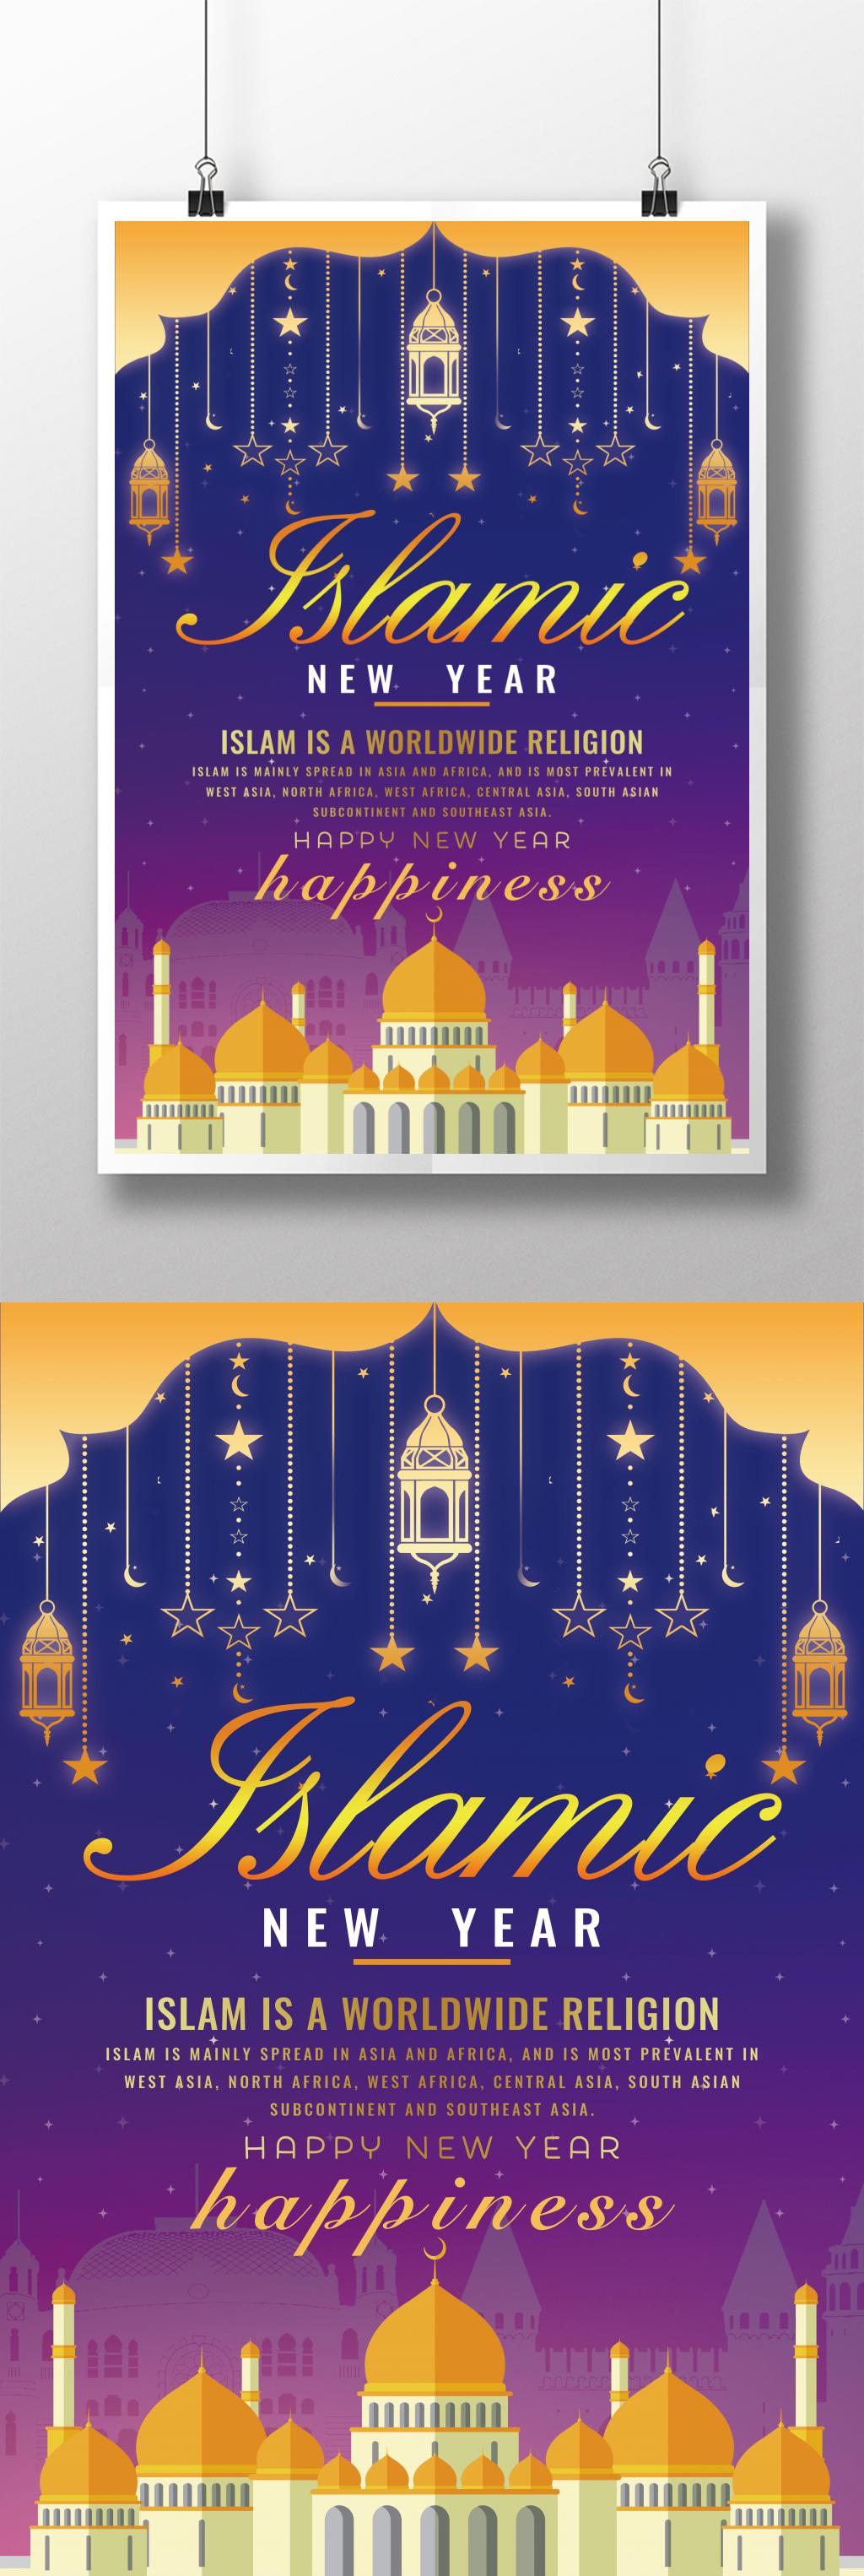 Islamic new year poster template image_picture free download 450022278 ...